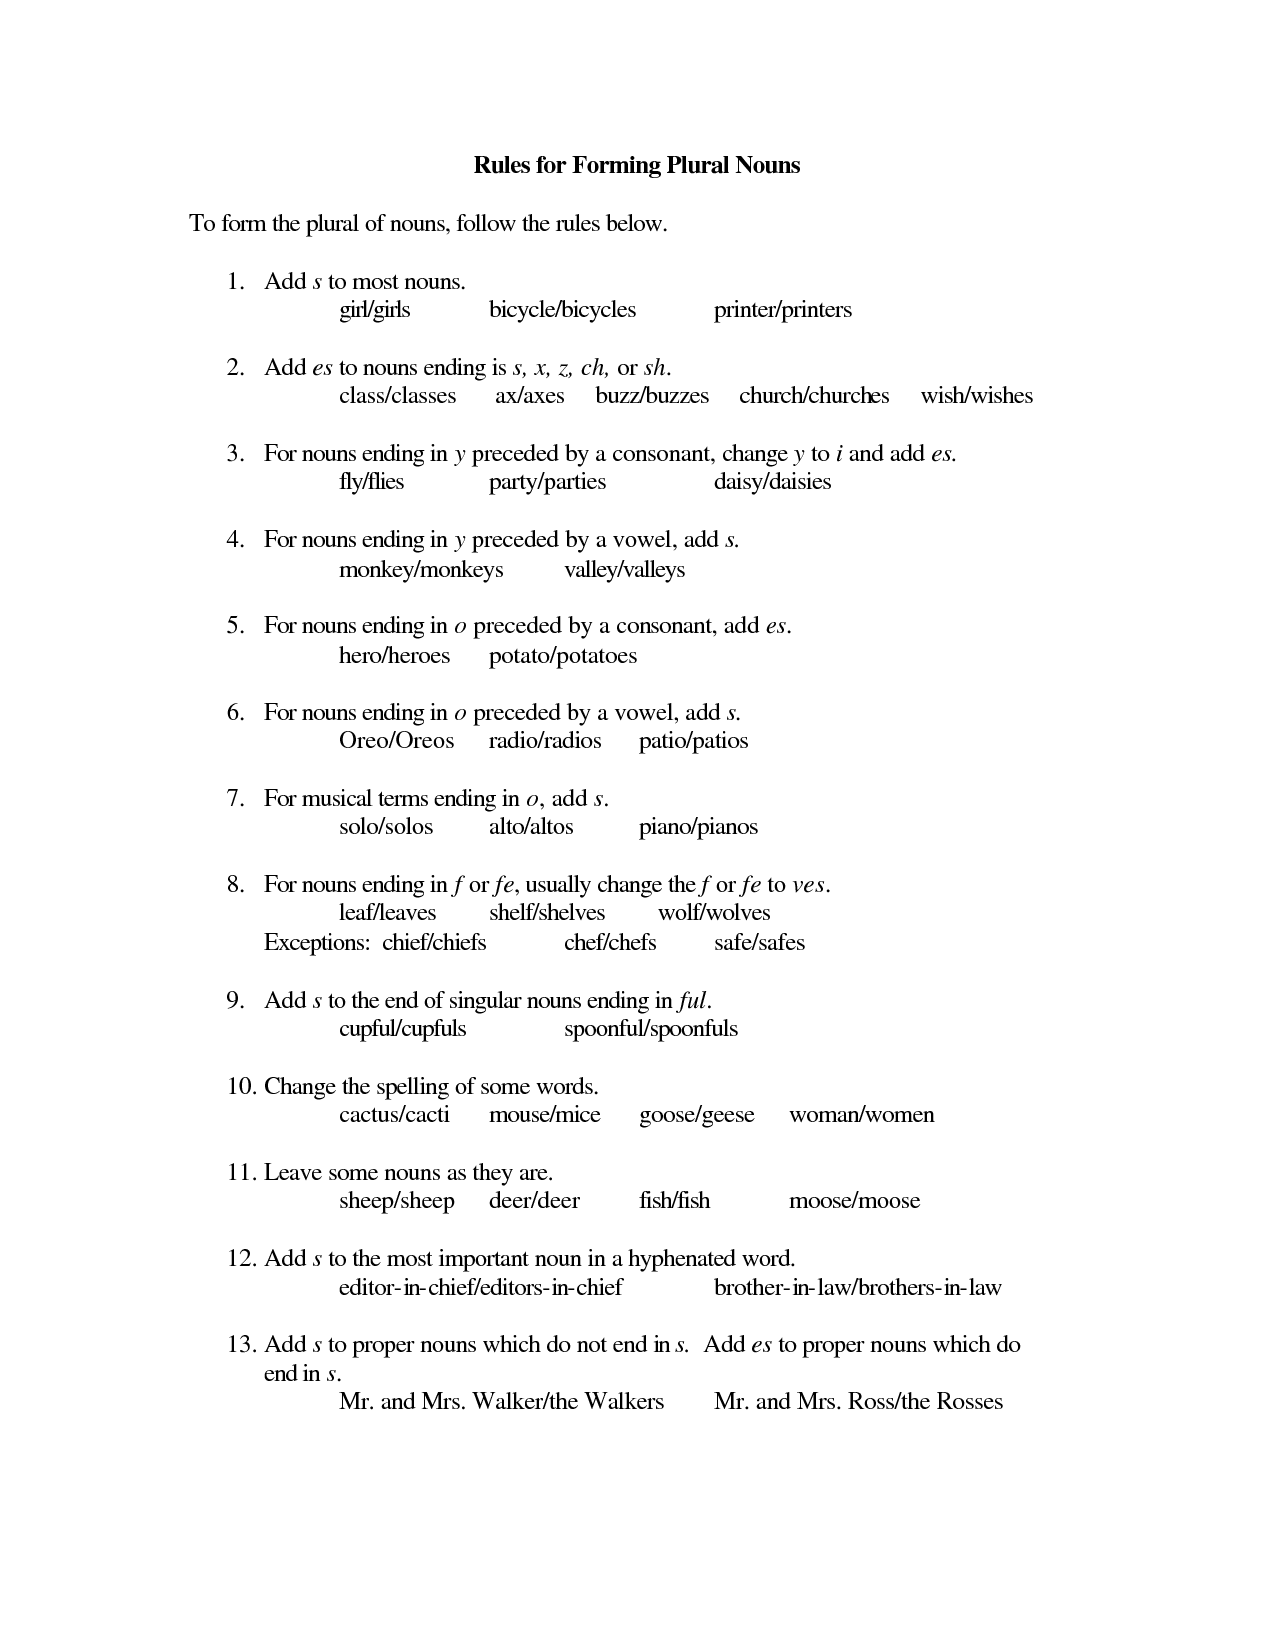 12-best-images-of-nouns-and-pronouns-worksheets-grade-2-possessive